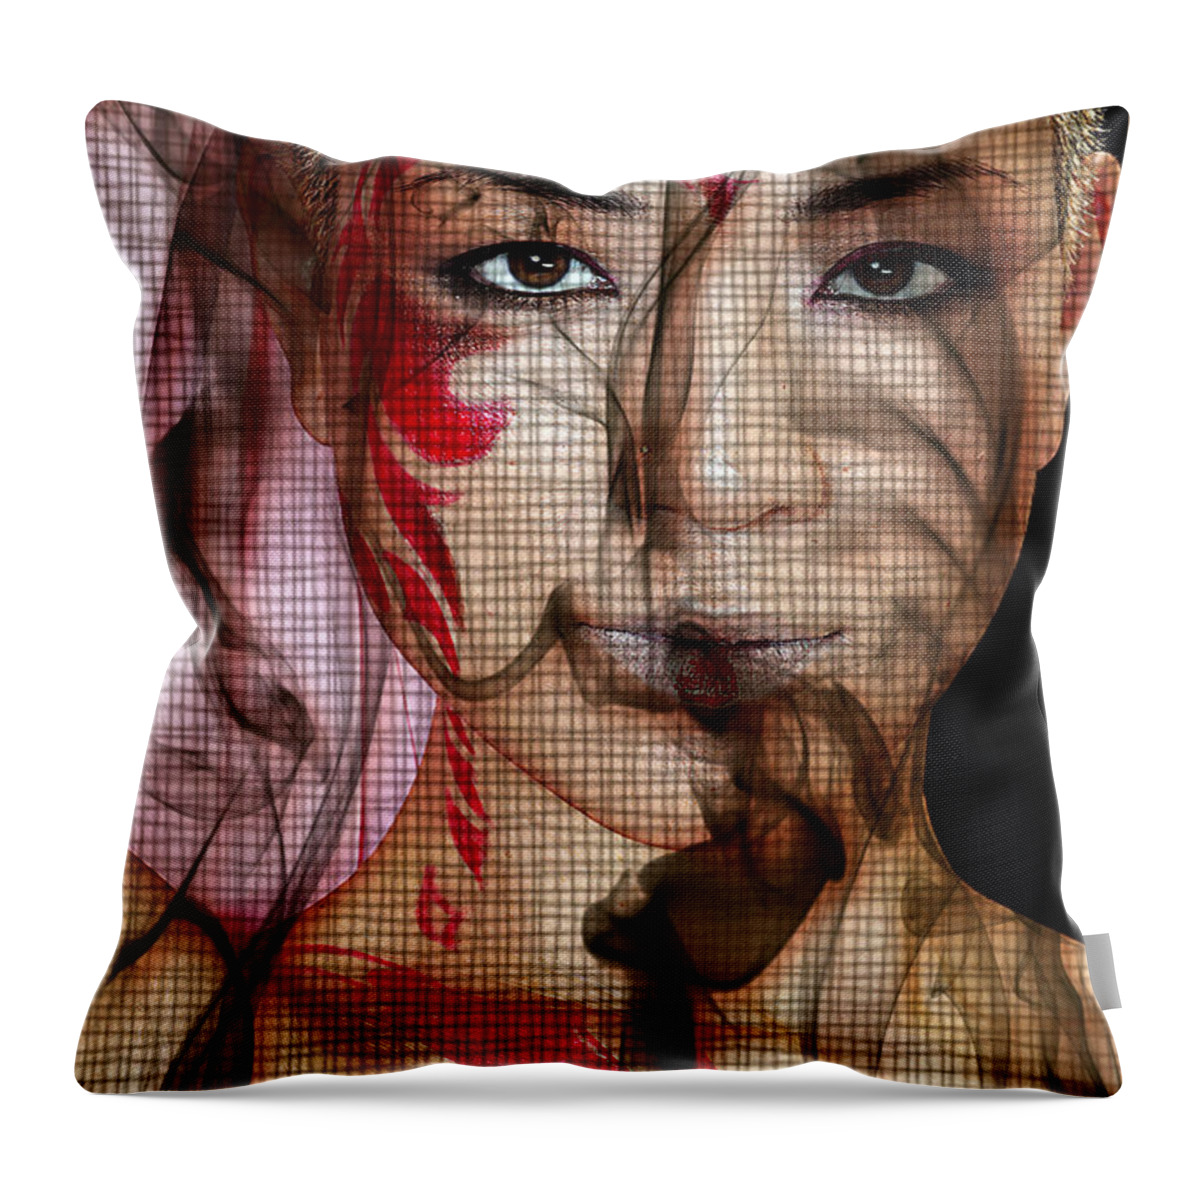 Clay Throw Pillow featuring the digital art Smoking Web by Clayton Bruster